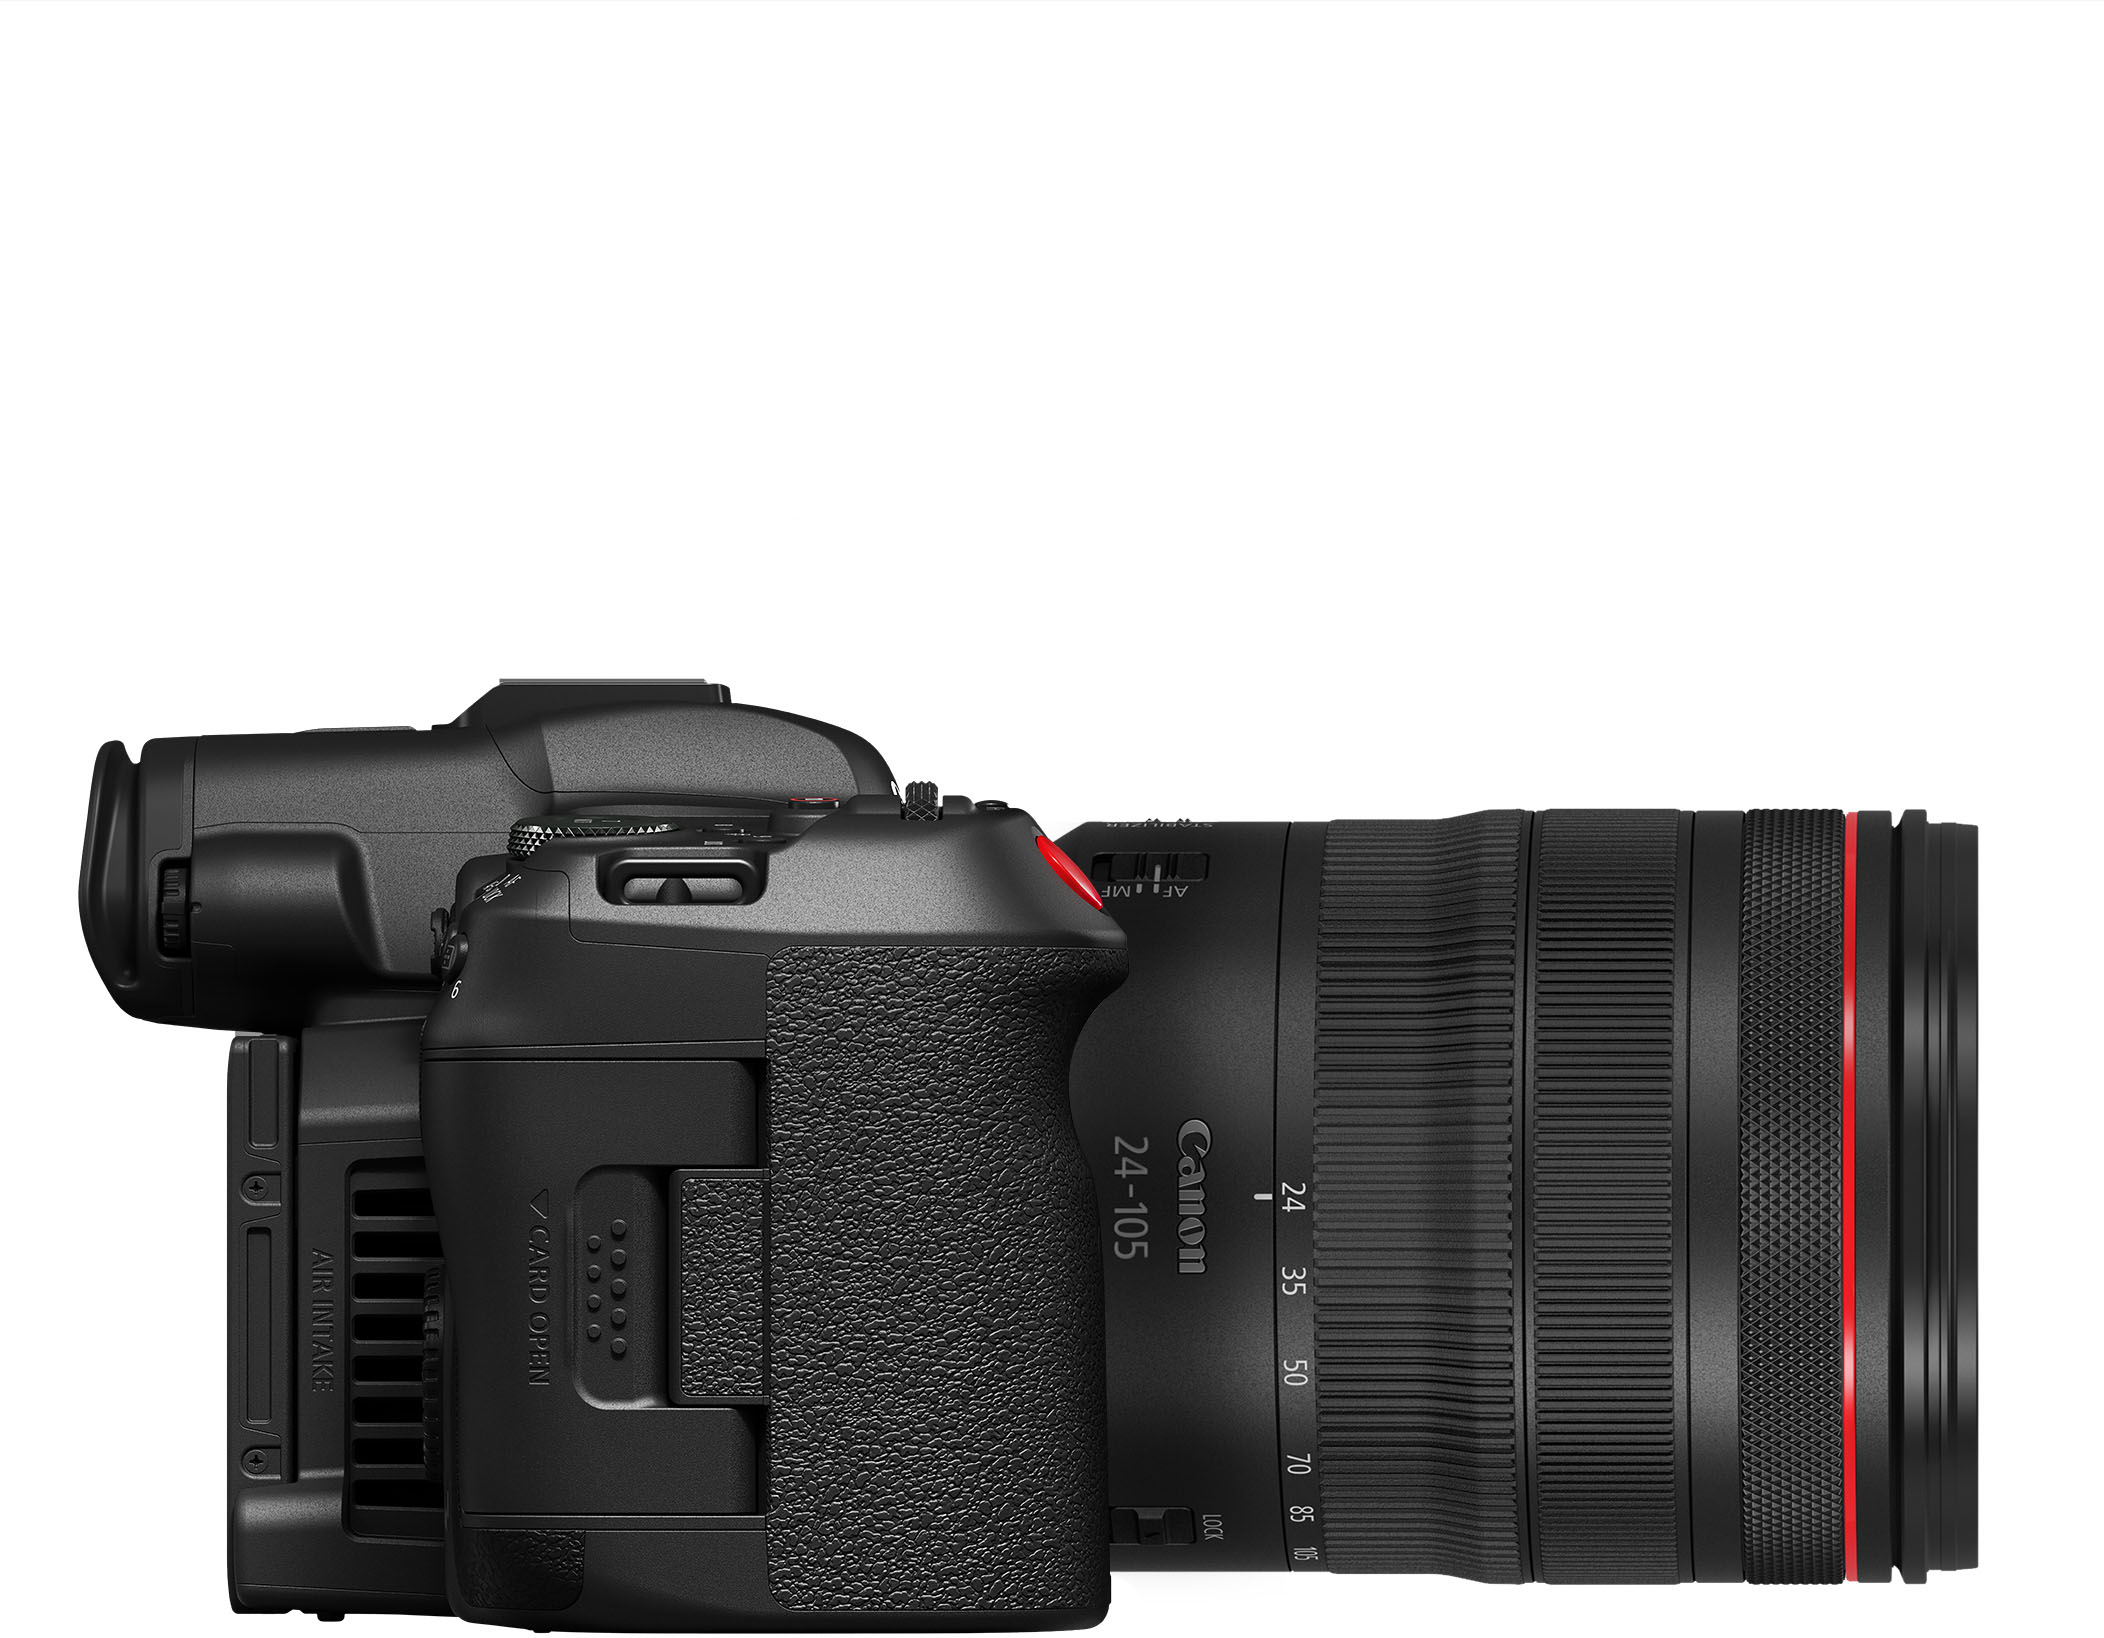 Angle View: Canon - EOS R5 C  8K Video Mirrorless Cinema Camera with RF 24-105mm f/4 L IS USM Lens - Black